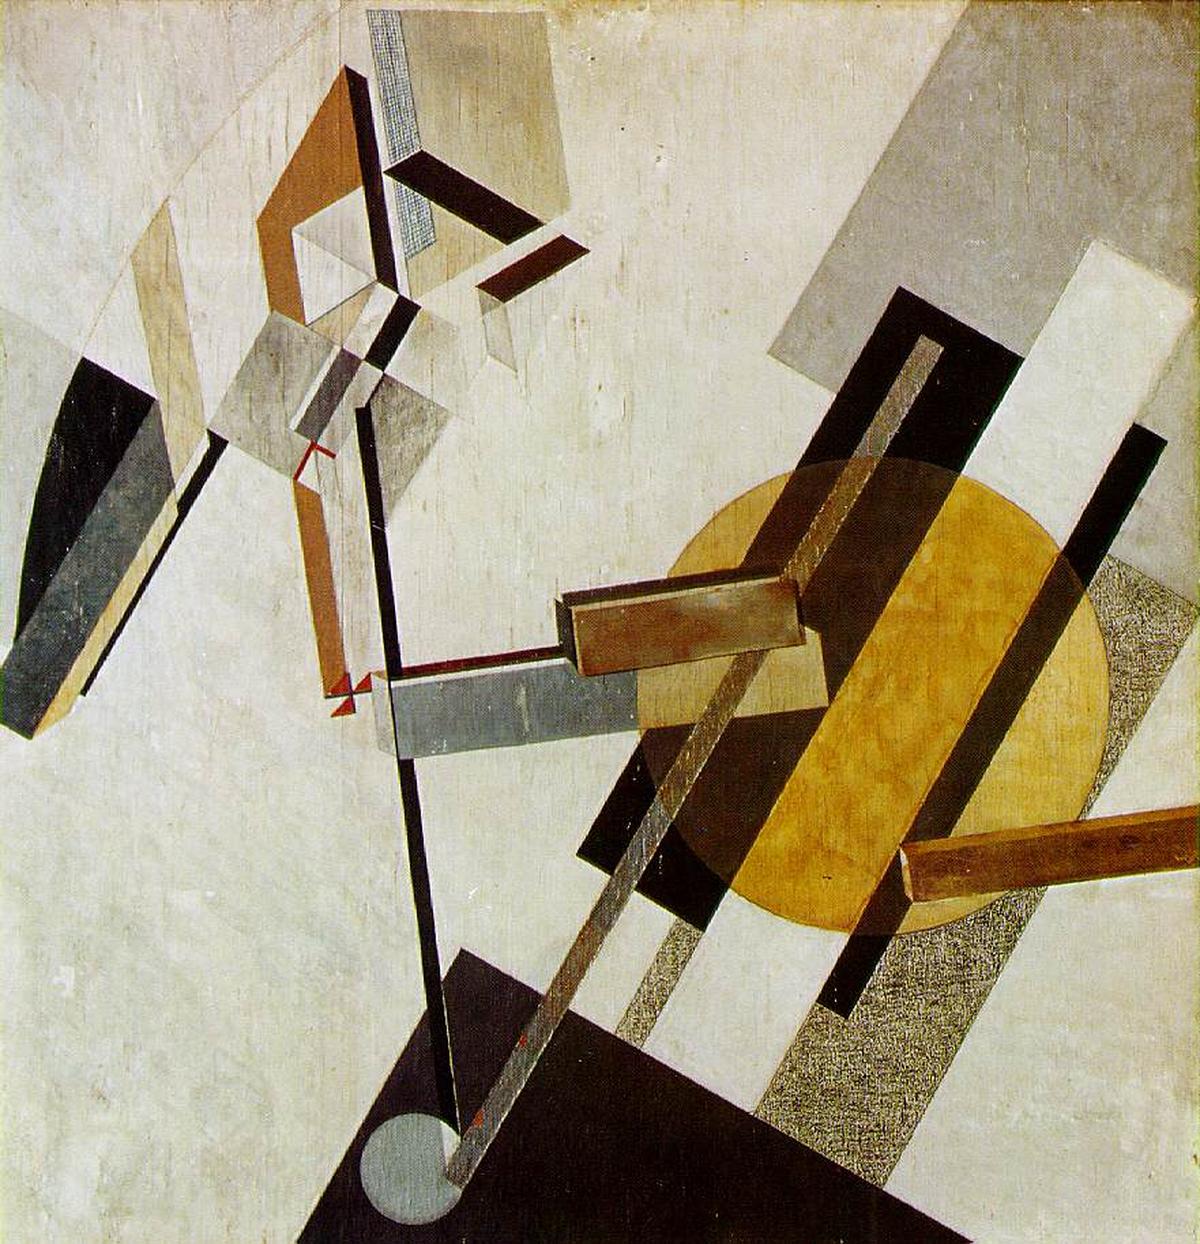 Pround 19D (1922) by El Lissitzky